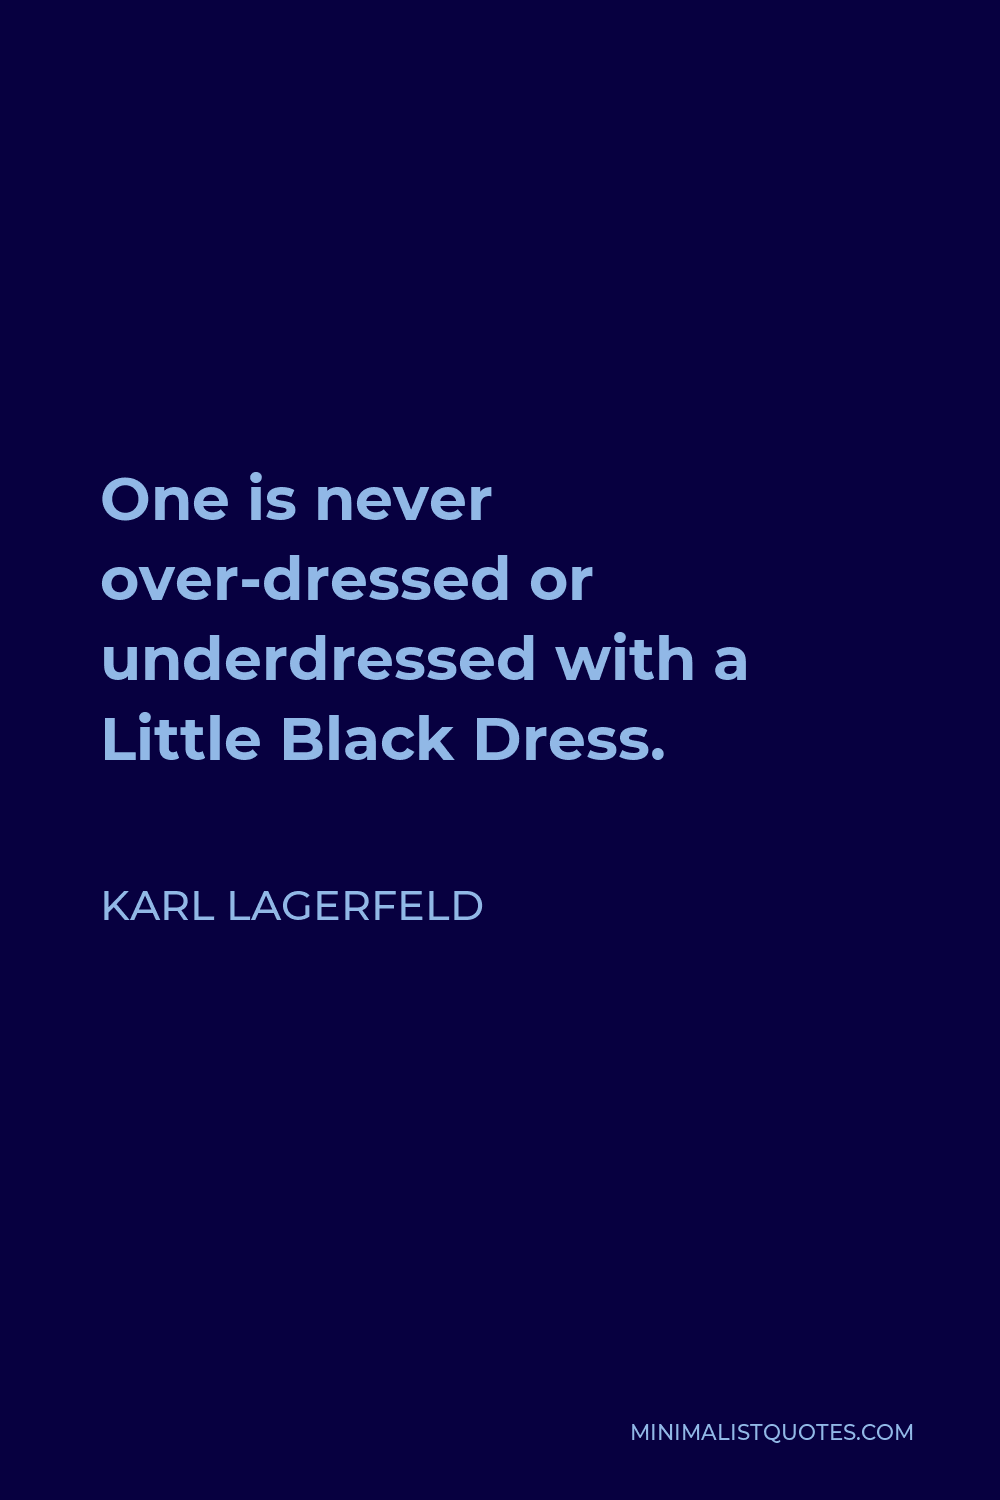 Karl Lagerfeld Quote - One is never over-dressed or underdressed with a Little Black Dress.